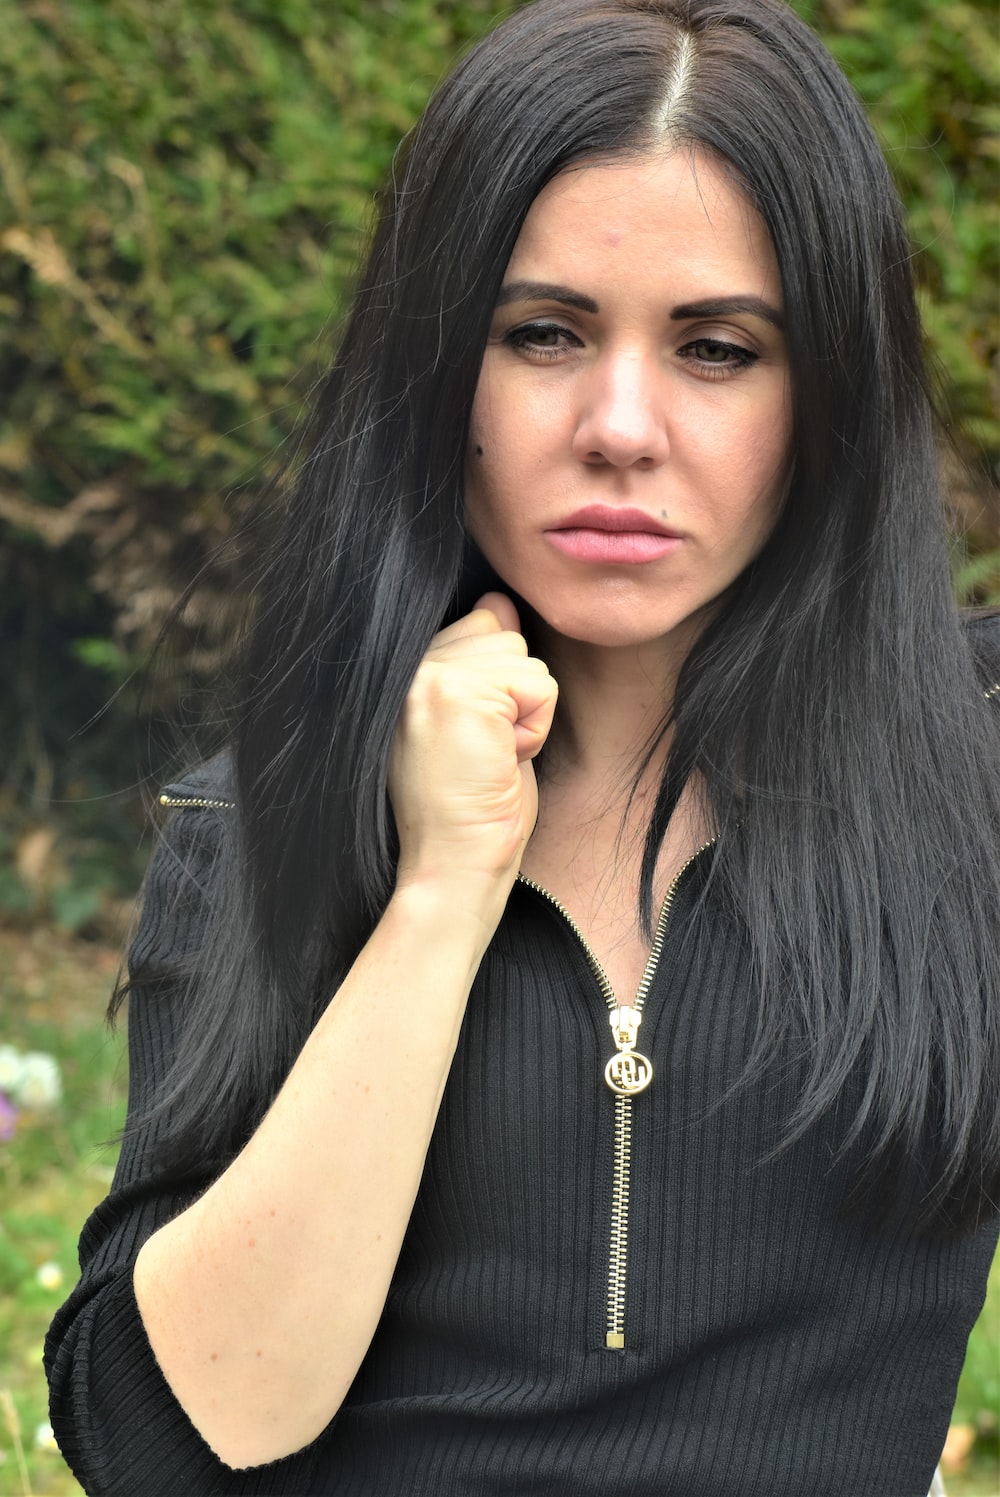 a woman with long black hair posing for a picture